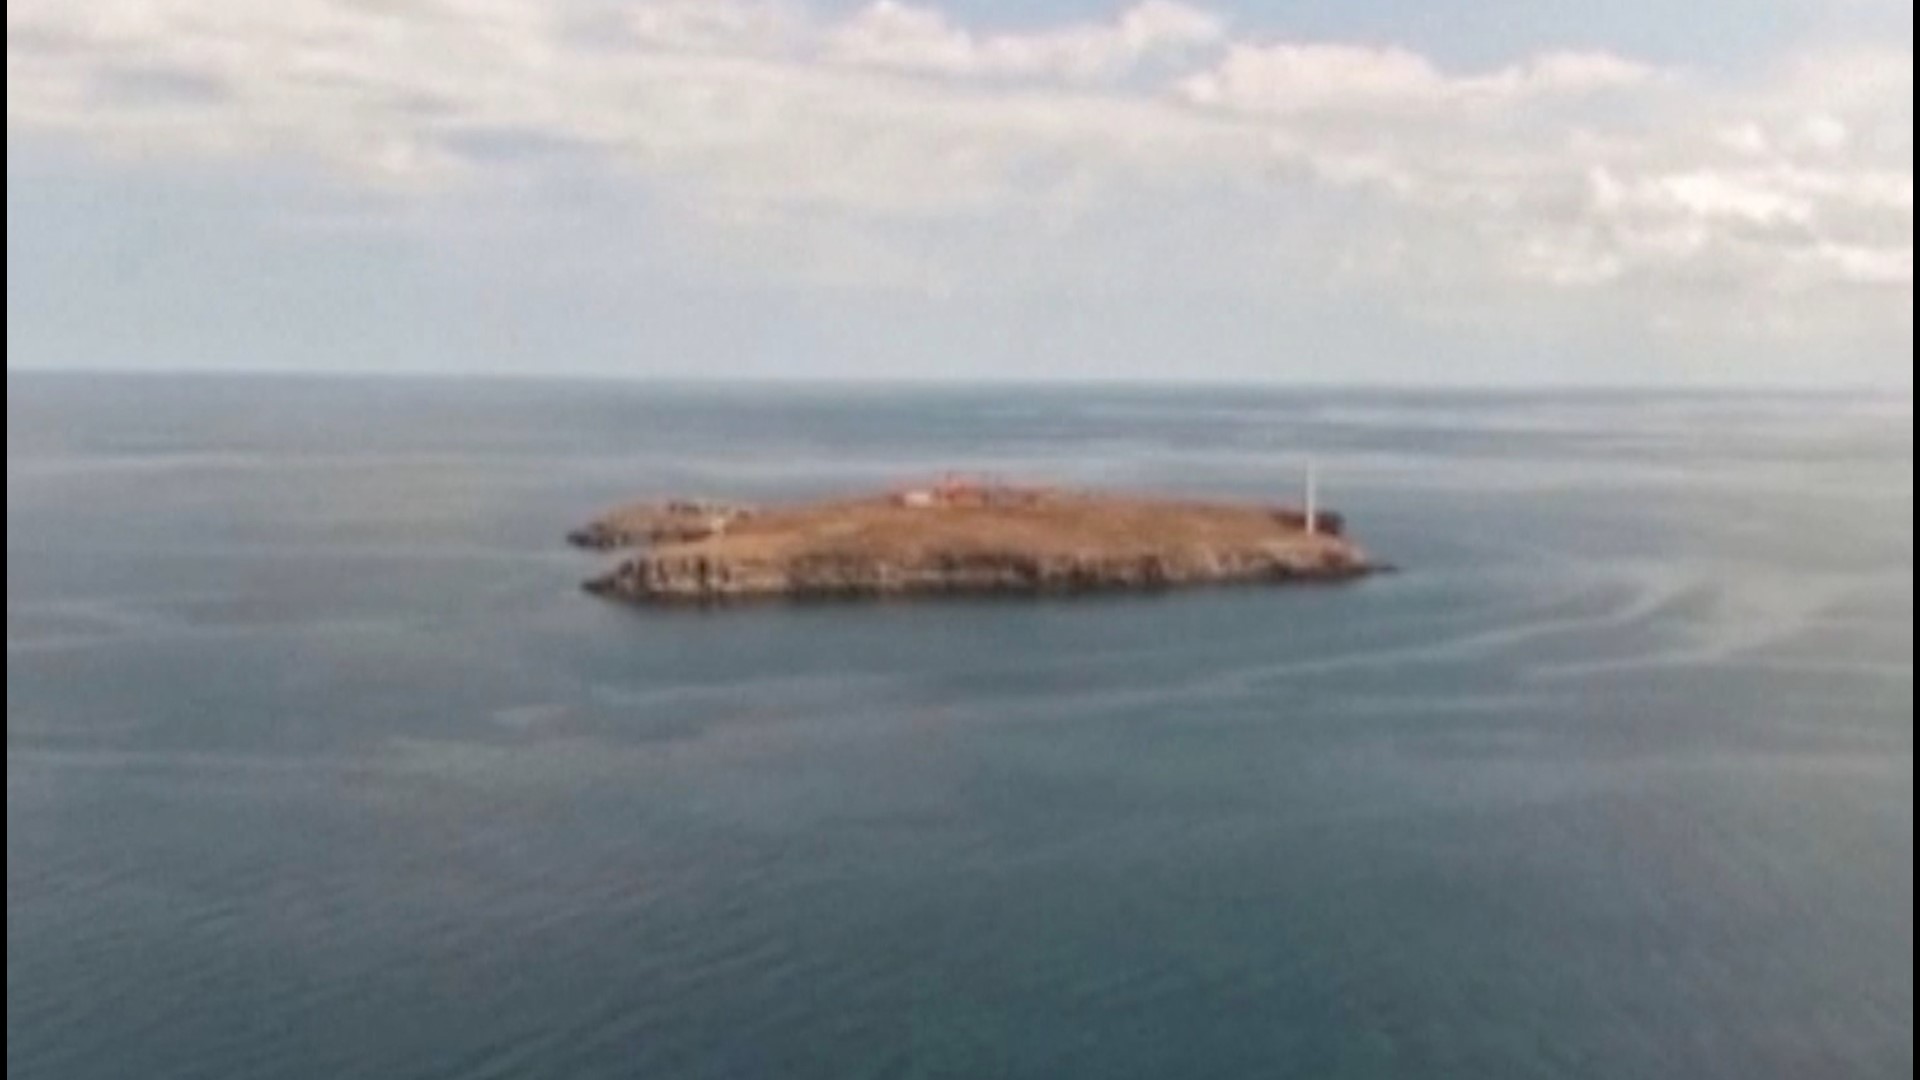 Snake Island is where Ukrainian soldiers told Russian troops to 'Go F*** yourself.' Veuer's Tony Spitz has the details.